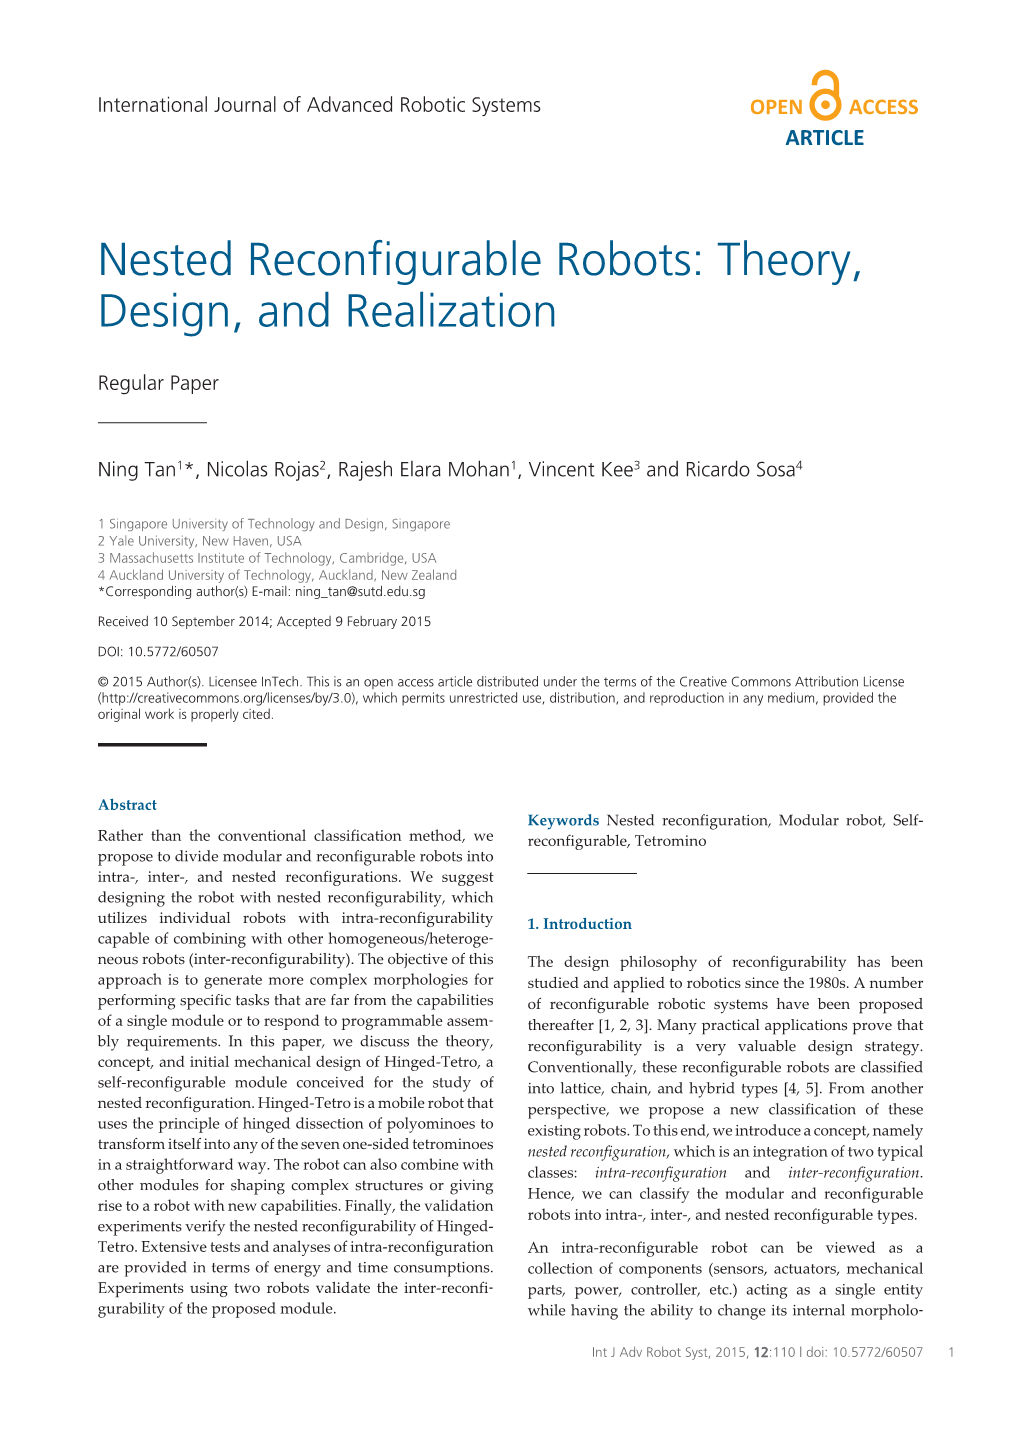 Nested Reconfigurable Robots: Theory, Design, and Realization